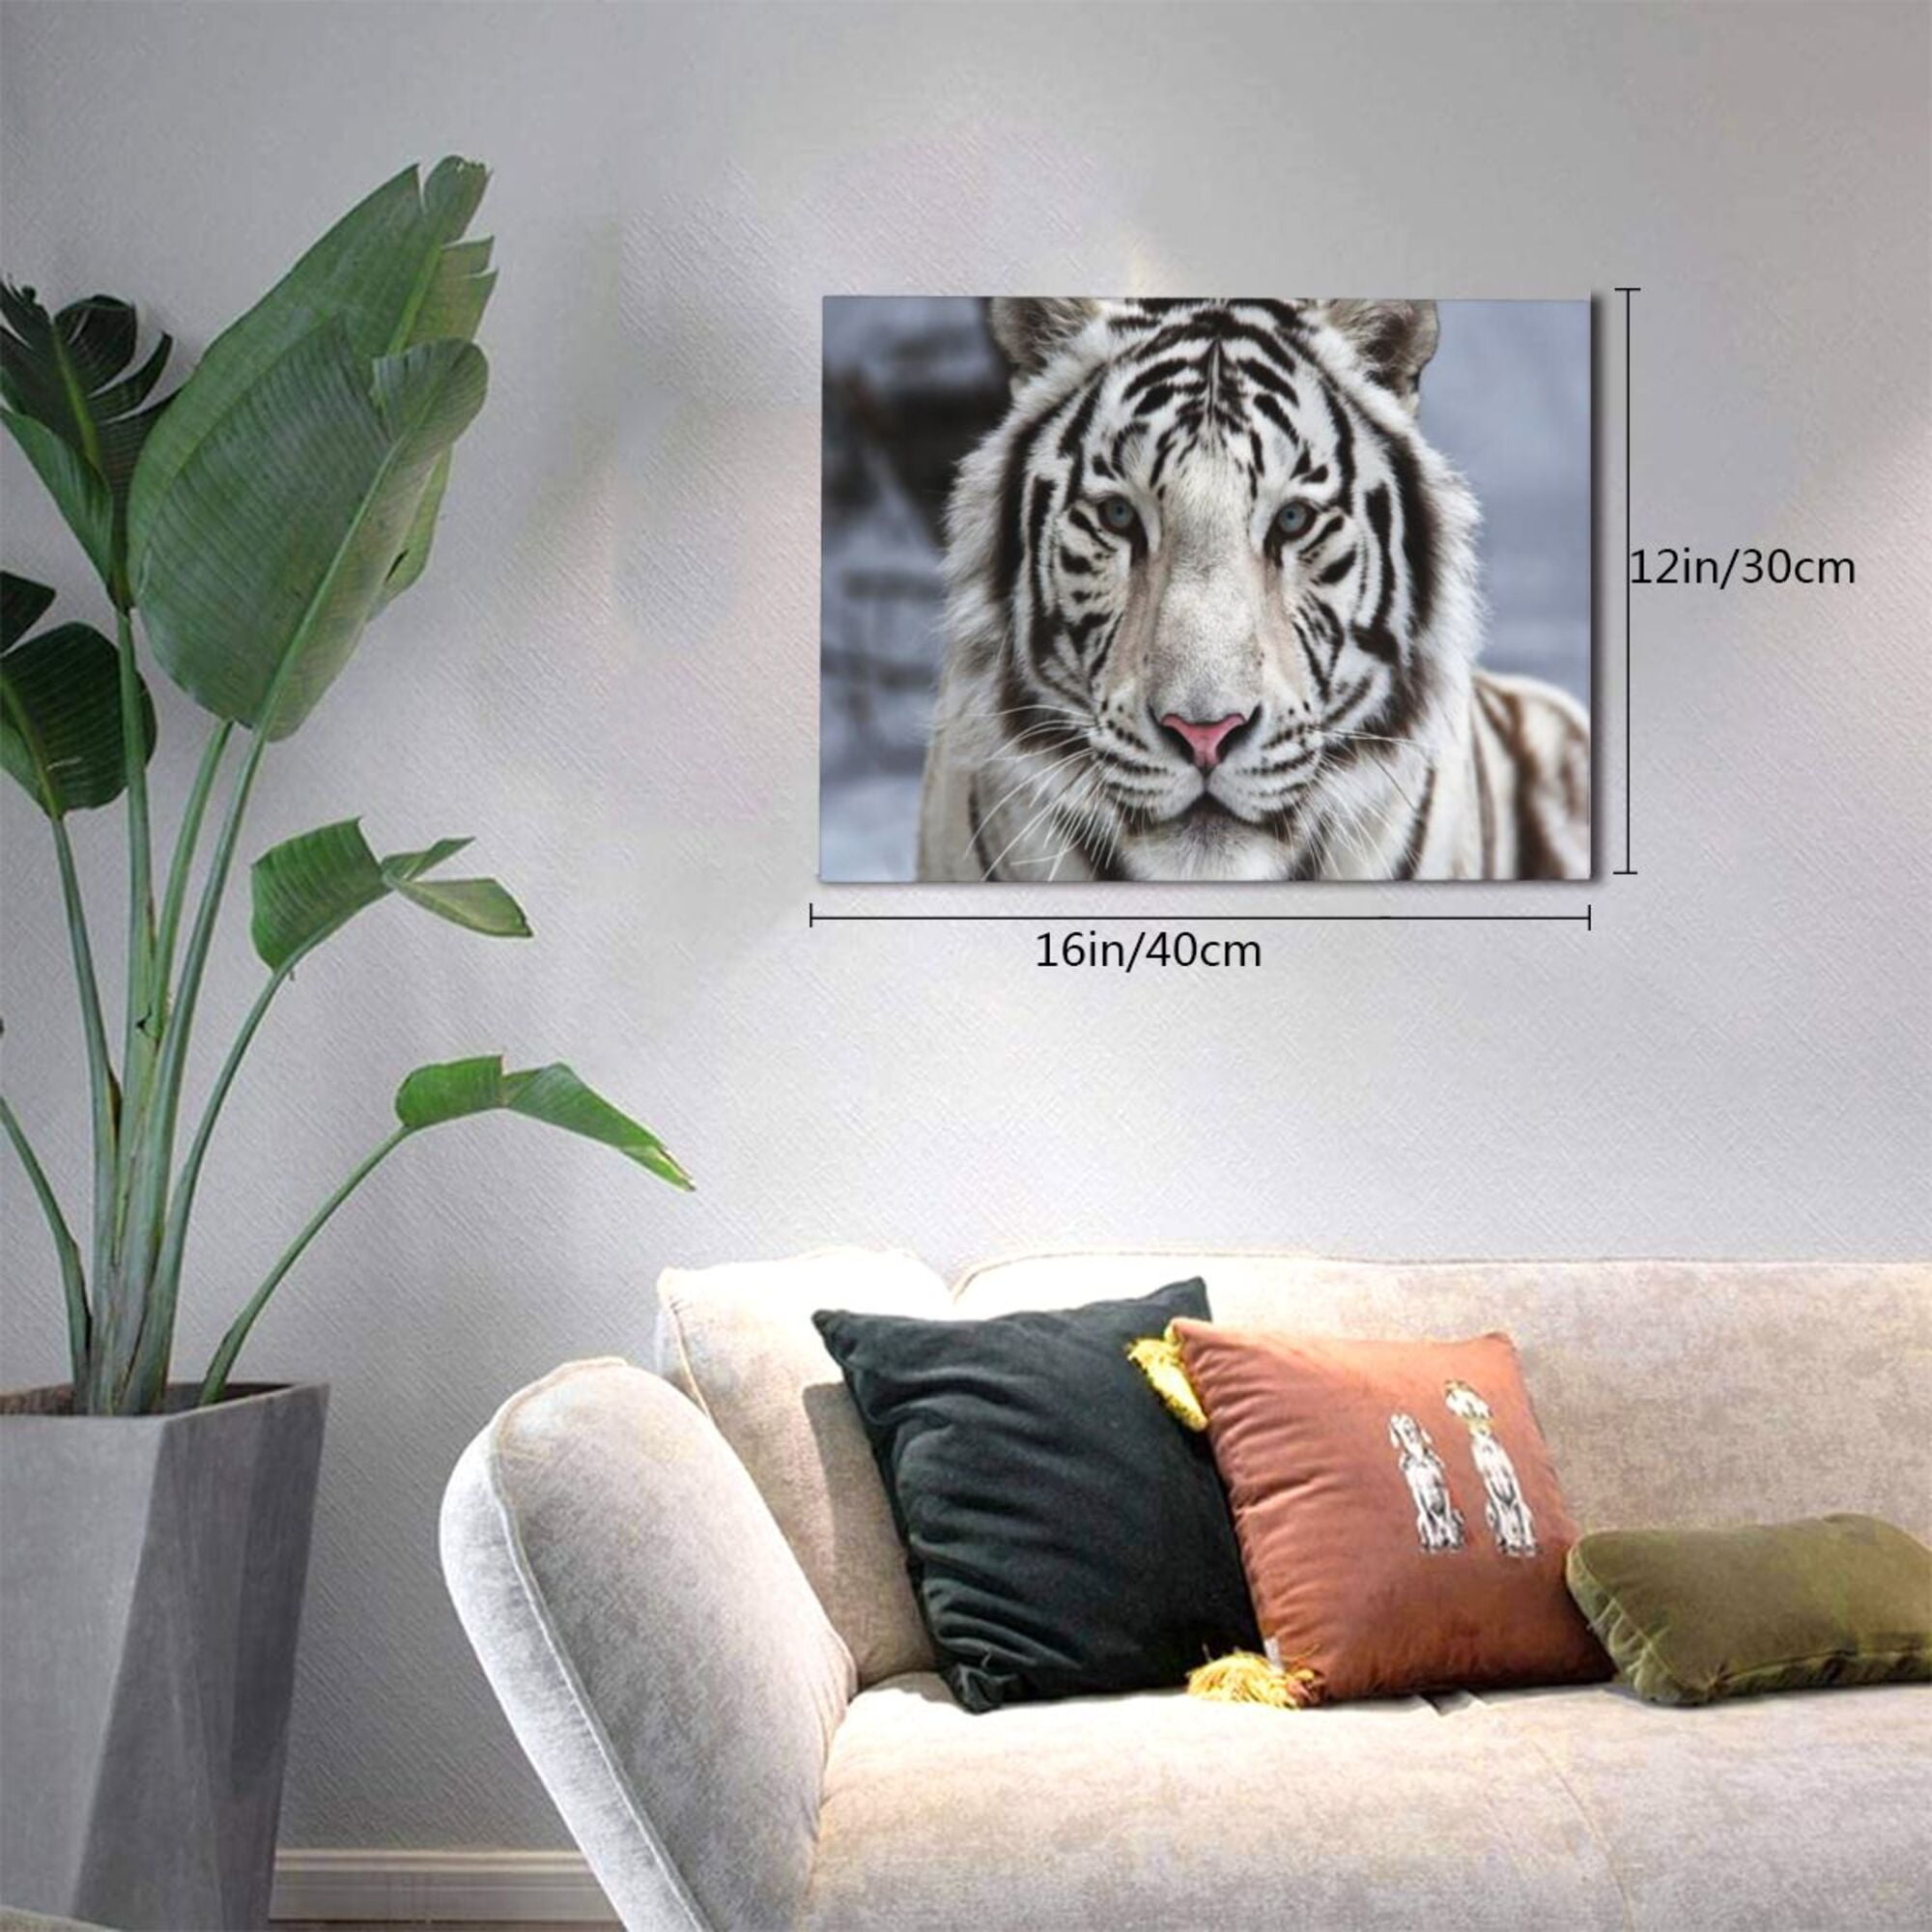 Decor White Tiger Decorations Living Room Bathroom Painting For Wall Framed Bathroom Bedroom Artwork Decor Canvas Modern 12x16in